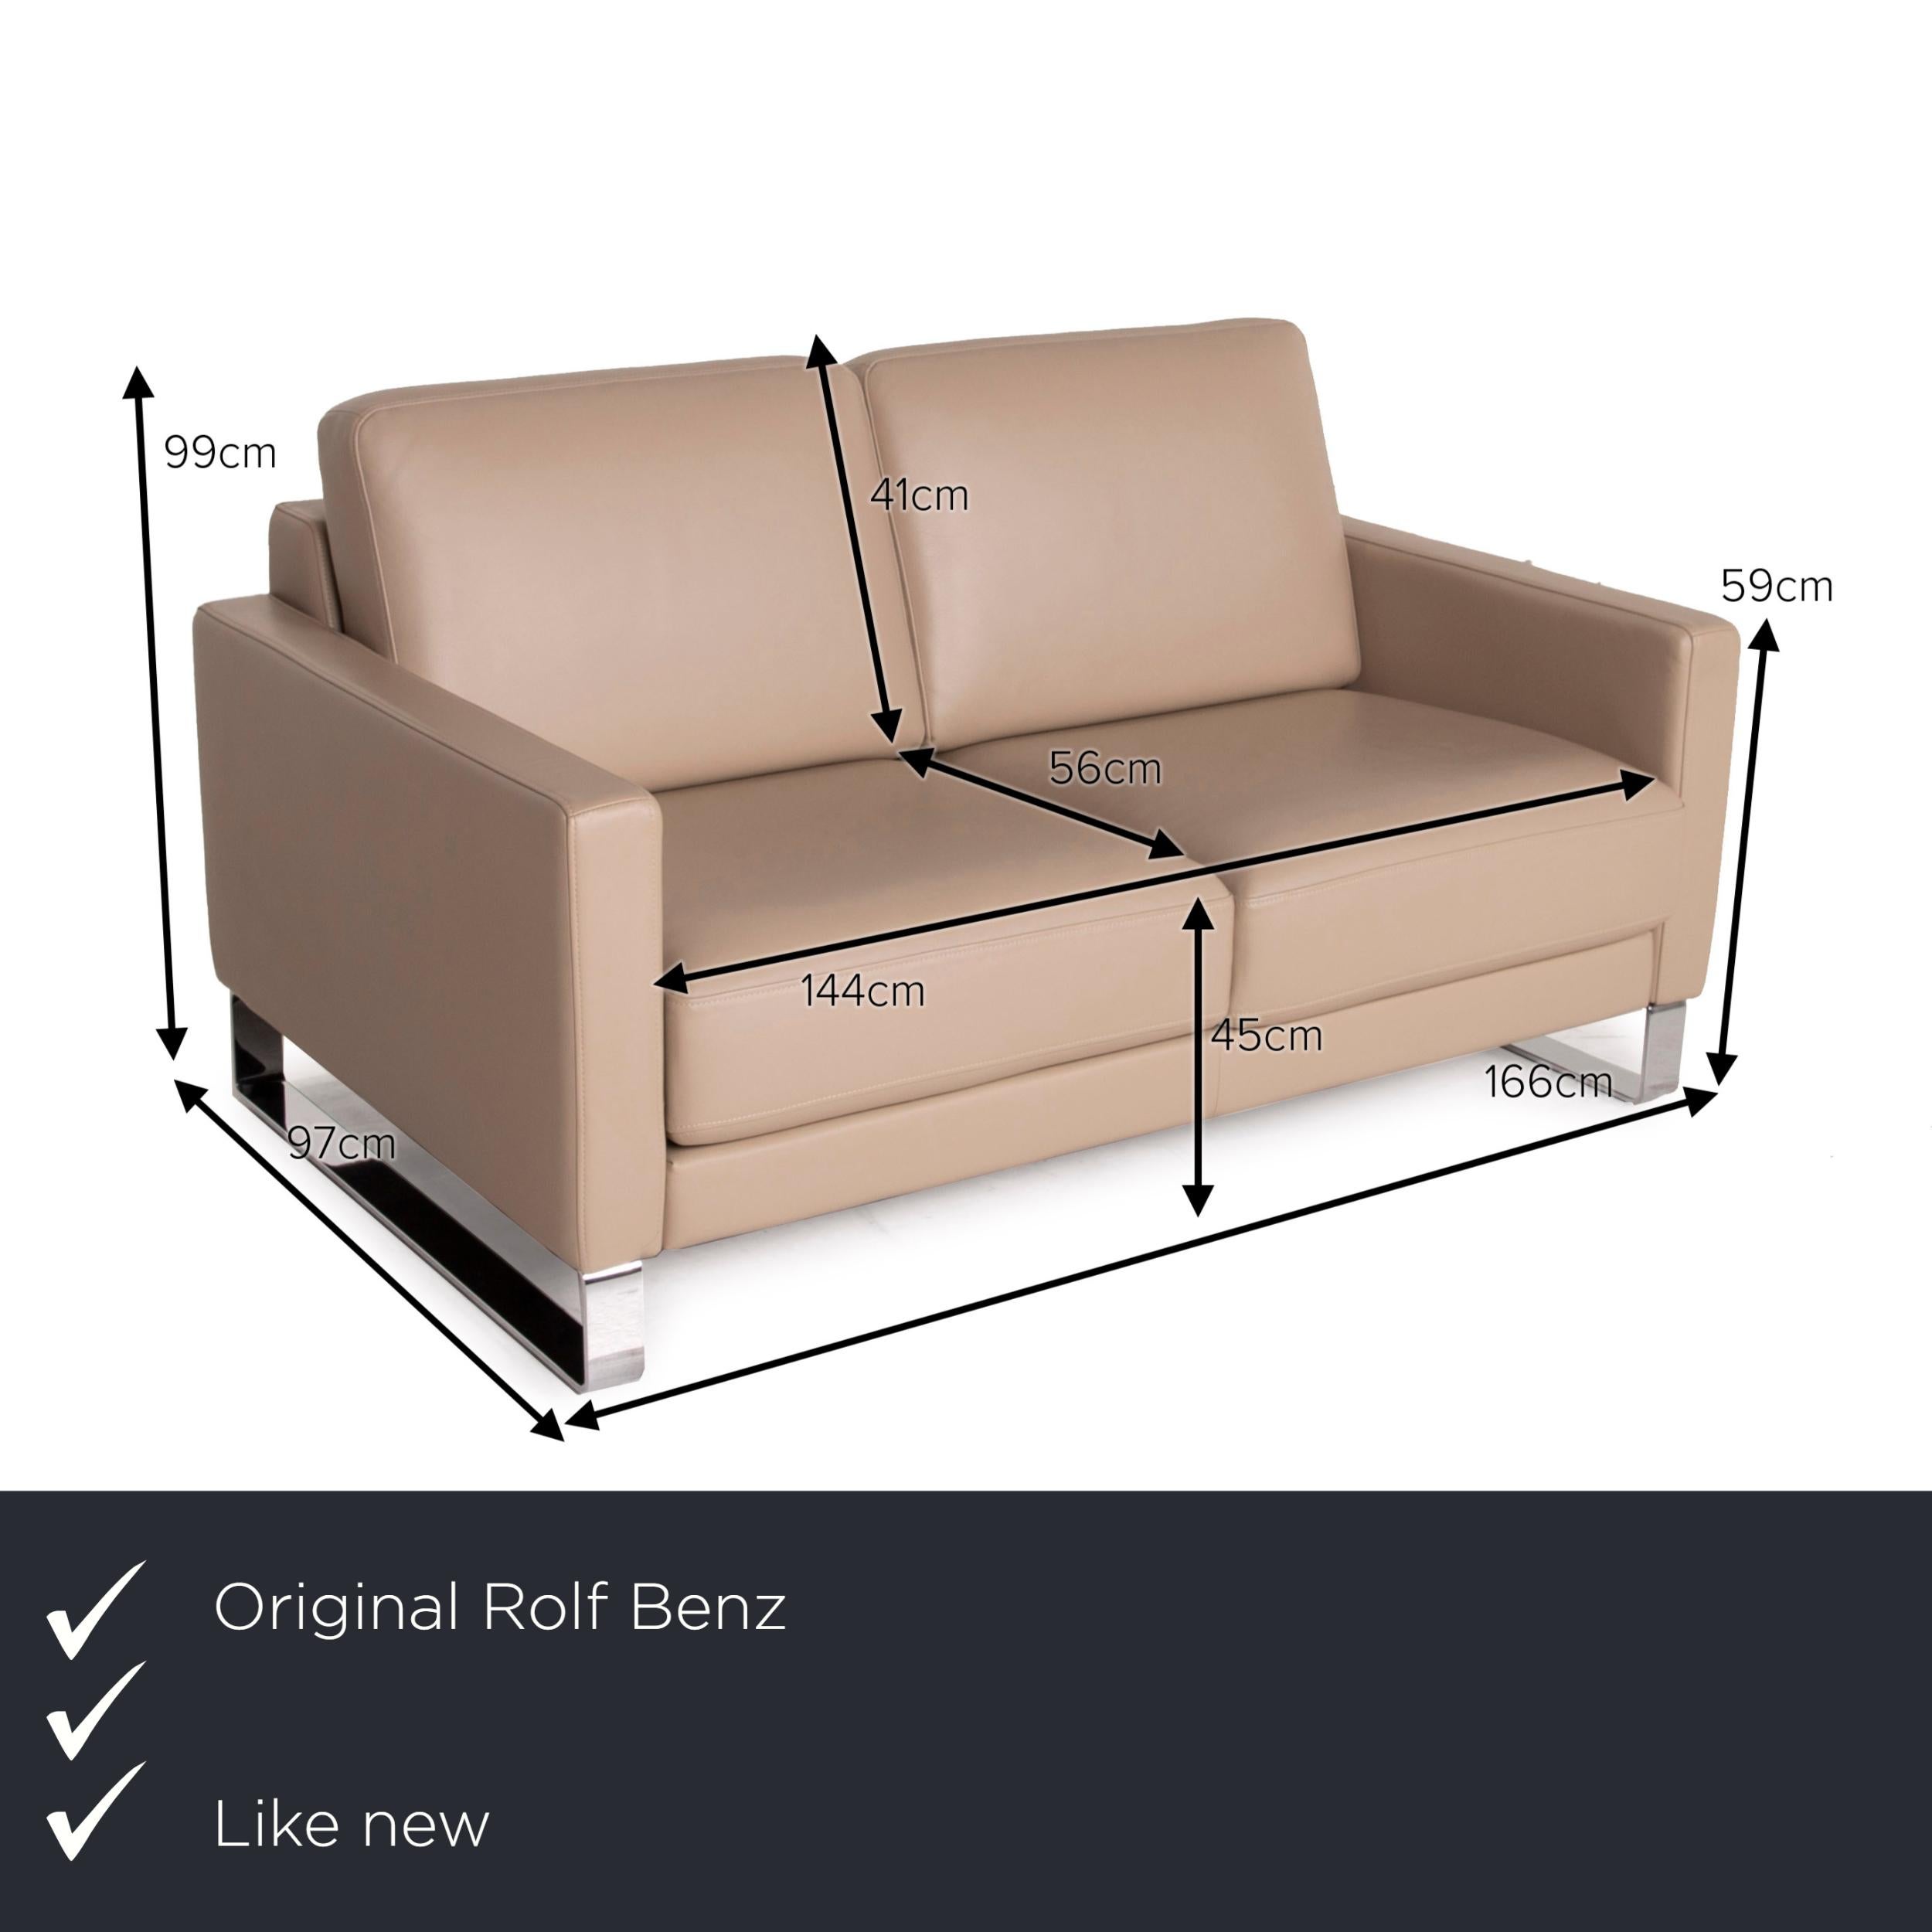 We present to you a Rolf Benz Ego leather sofa brown two-seater.
  
 

 Product measurements in centimeters:
 

 depth: 97
 width: 166
seat height: 45
 rest height: 59
 seat depth: 56
 seat width: 146
 back height: 41.
  